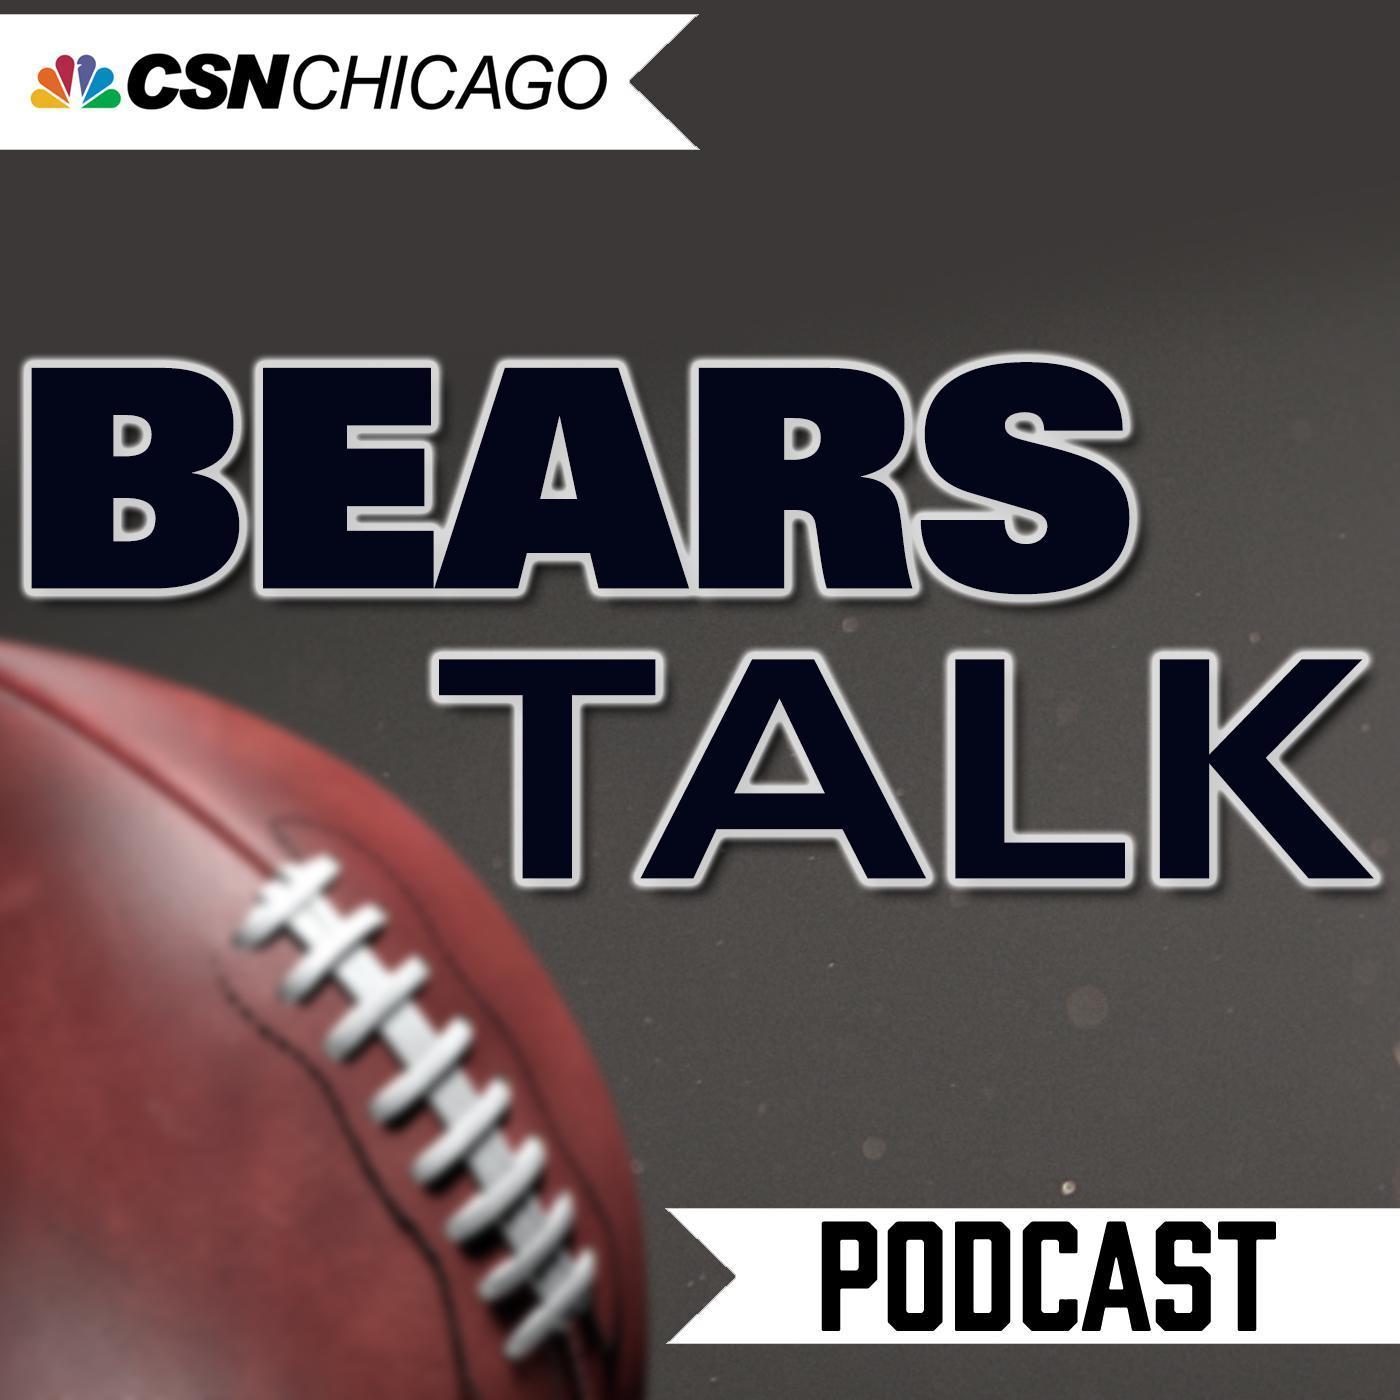 Ep. 19: Bears fall to 2-7 and miss an opportunity to gain momentum